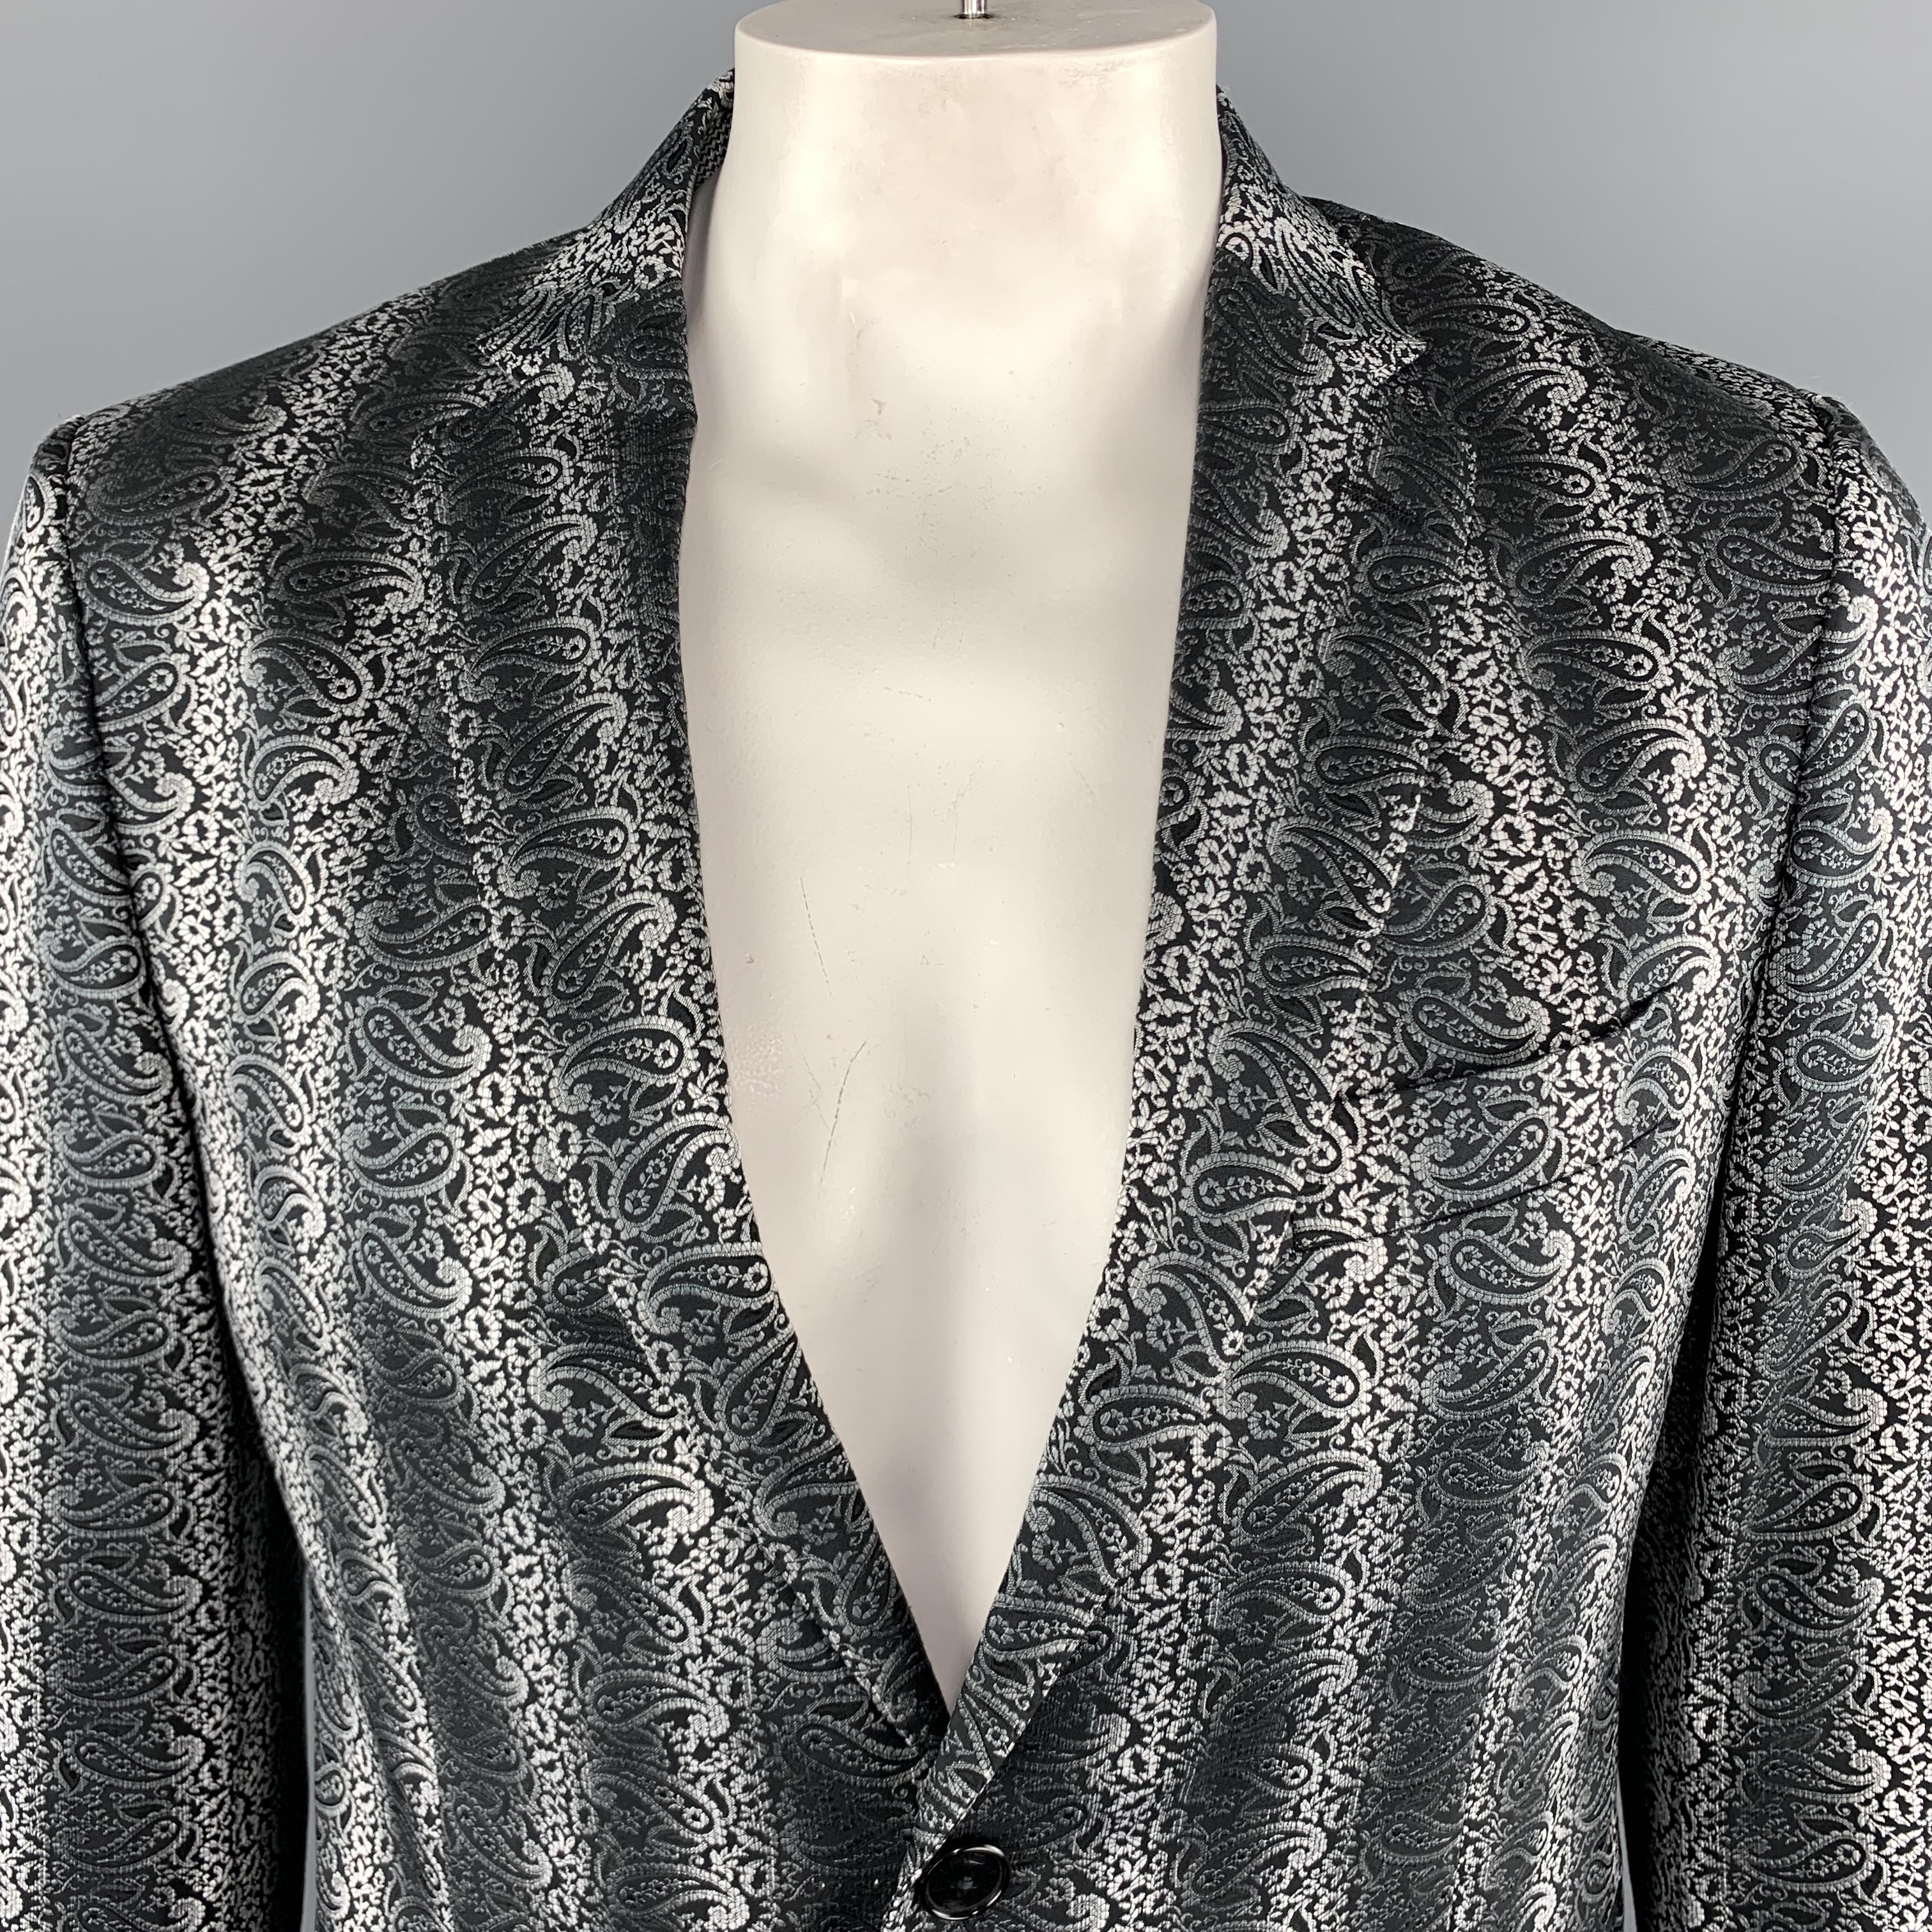 ETRO Sport Coat Jacket comes in black and grey tones in a paisley jacquard polyester blend material, with a notch lapel, two buttons at closure, single breasted, slit and flap pockets, and buttoned cuffs. Made in Italy.

Excellent Pre-Owned